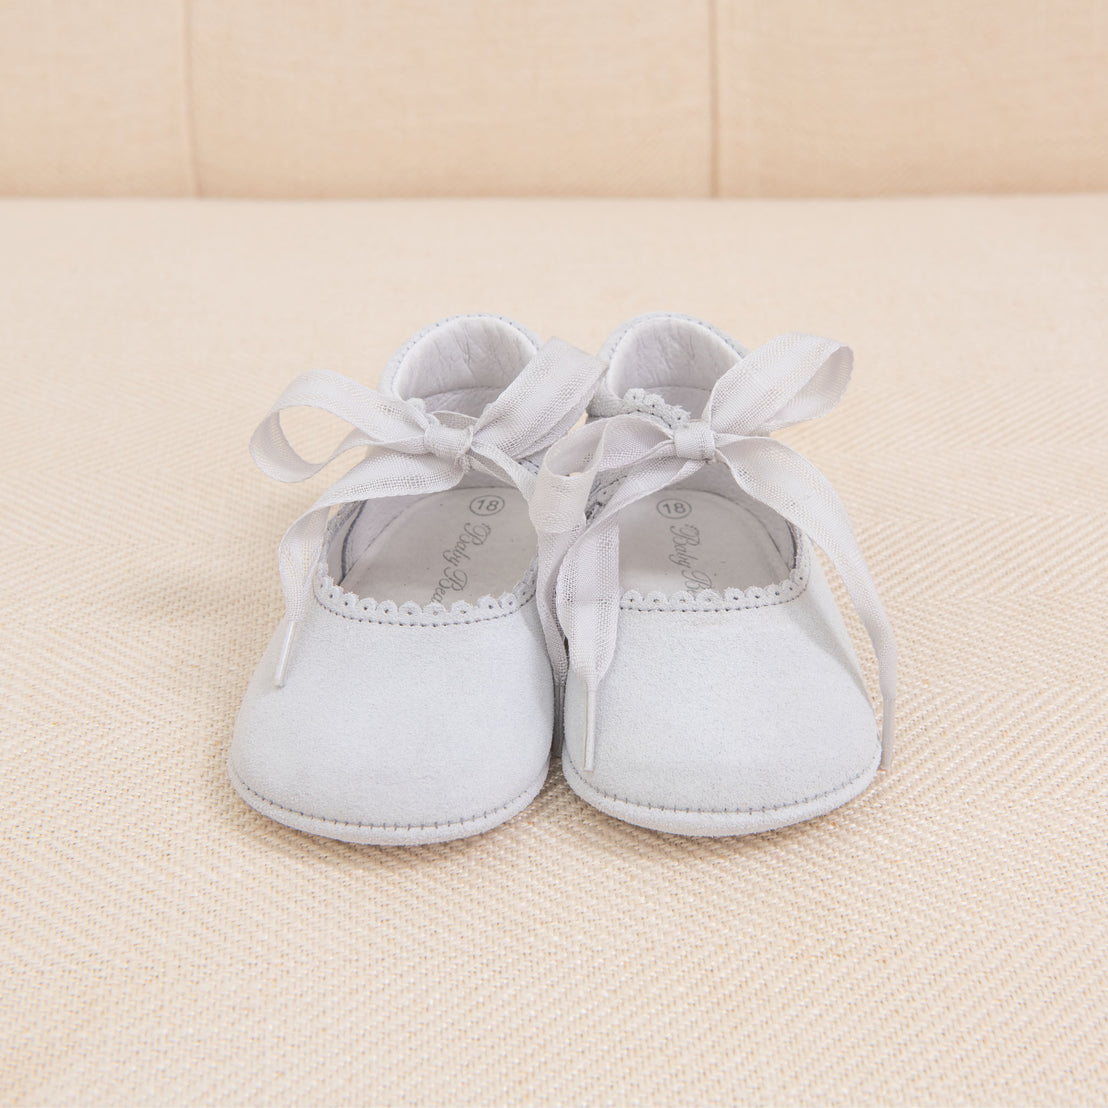 A pair of Girls Suede Tie Mary Janes with decorative white stitching and satin ribbon ties, displayed on a soft beige background.